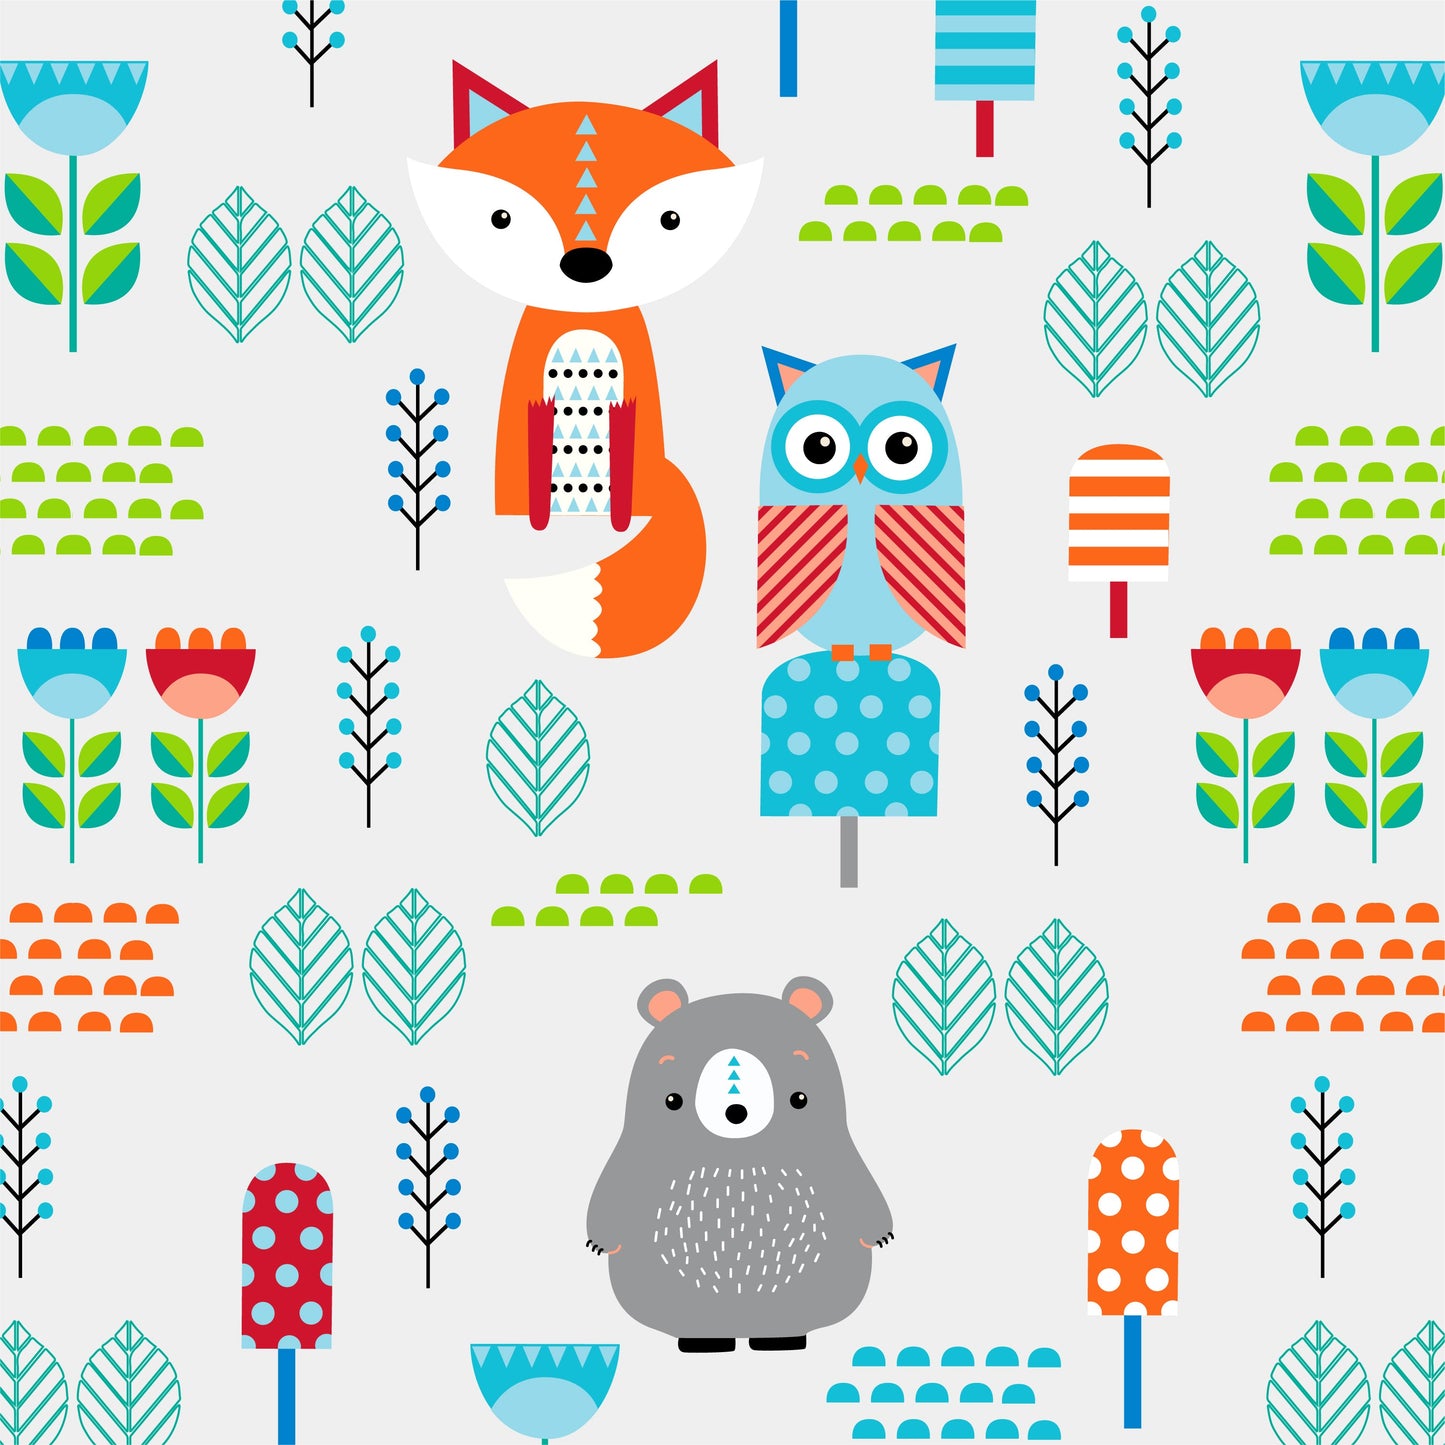 Smart Steps Bounce N' Play Jumper in Fun Geo Forest fashion with animal